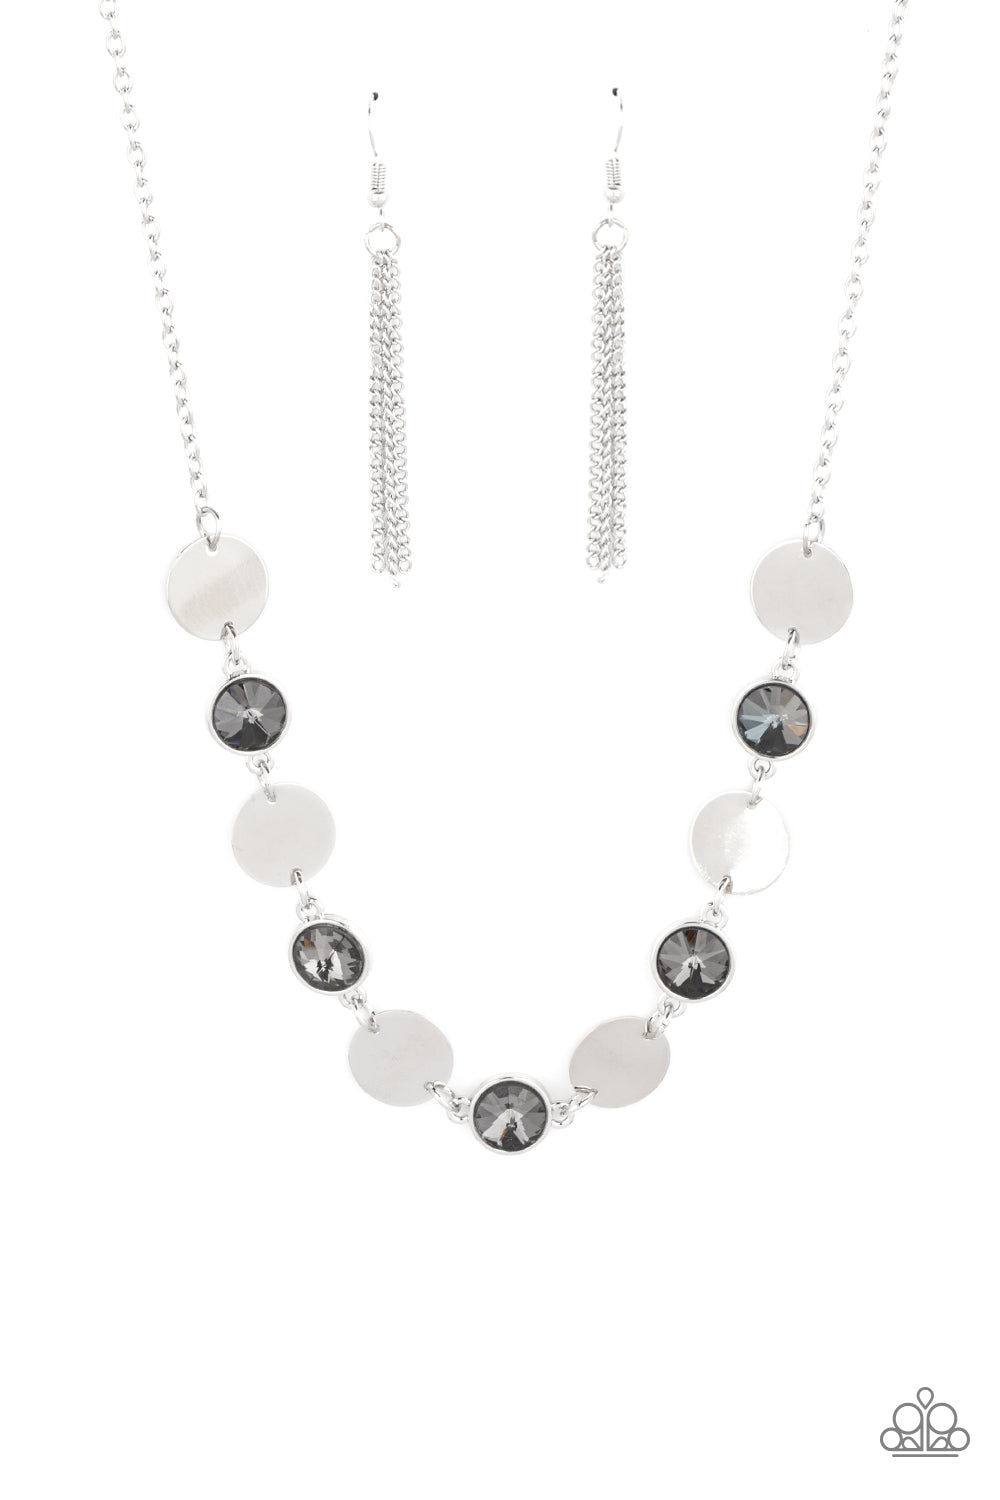 REFINED REFLECTIONS - SILVER NECKLACE